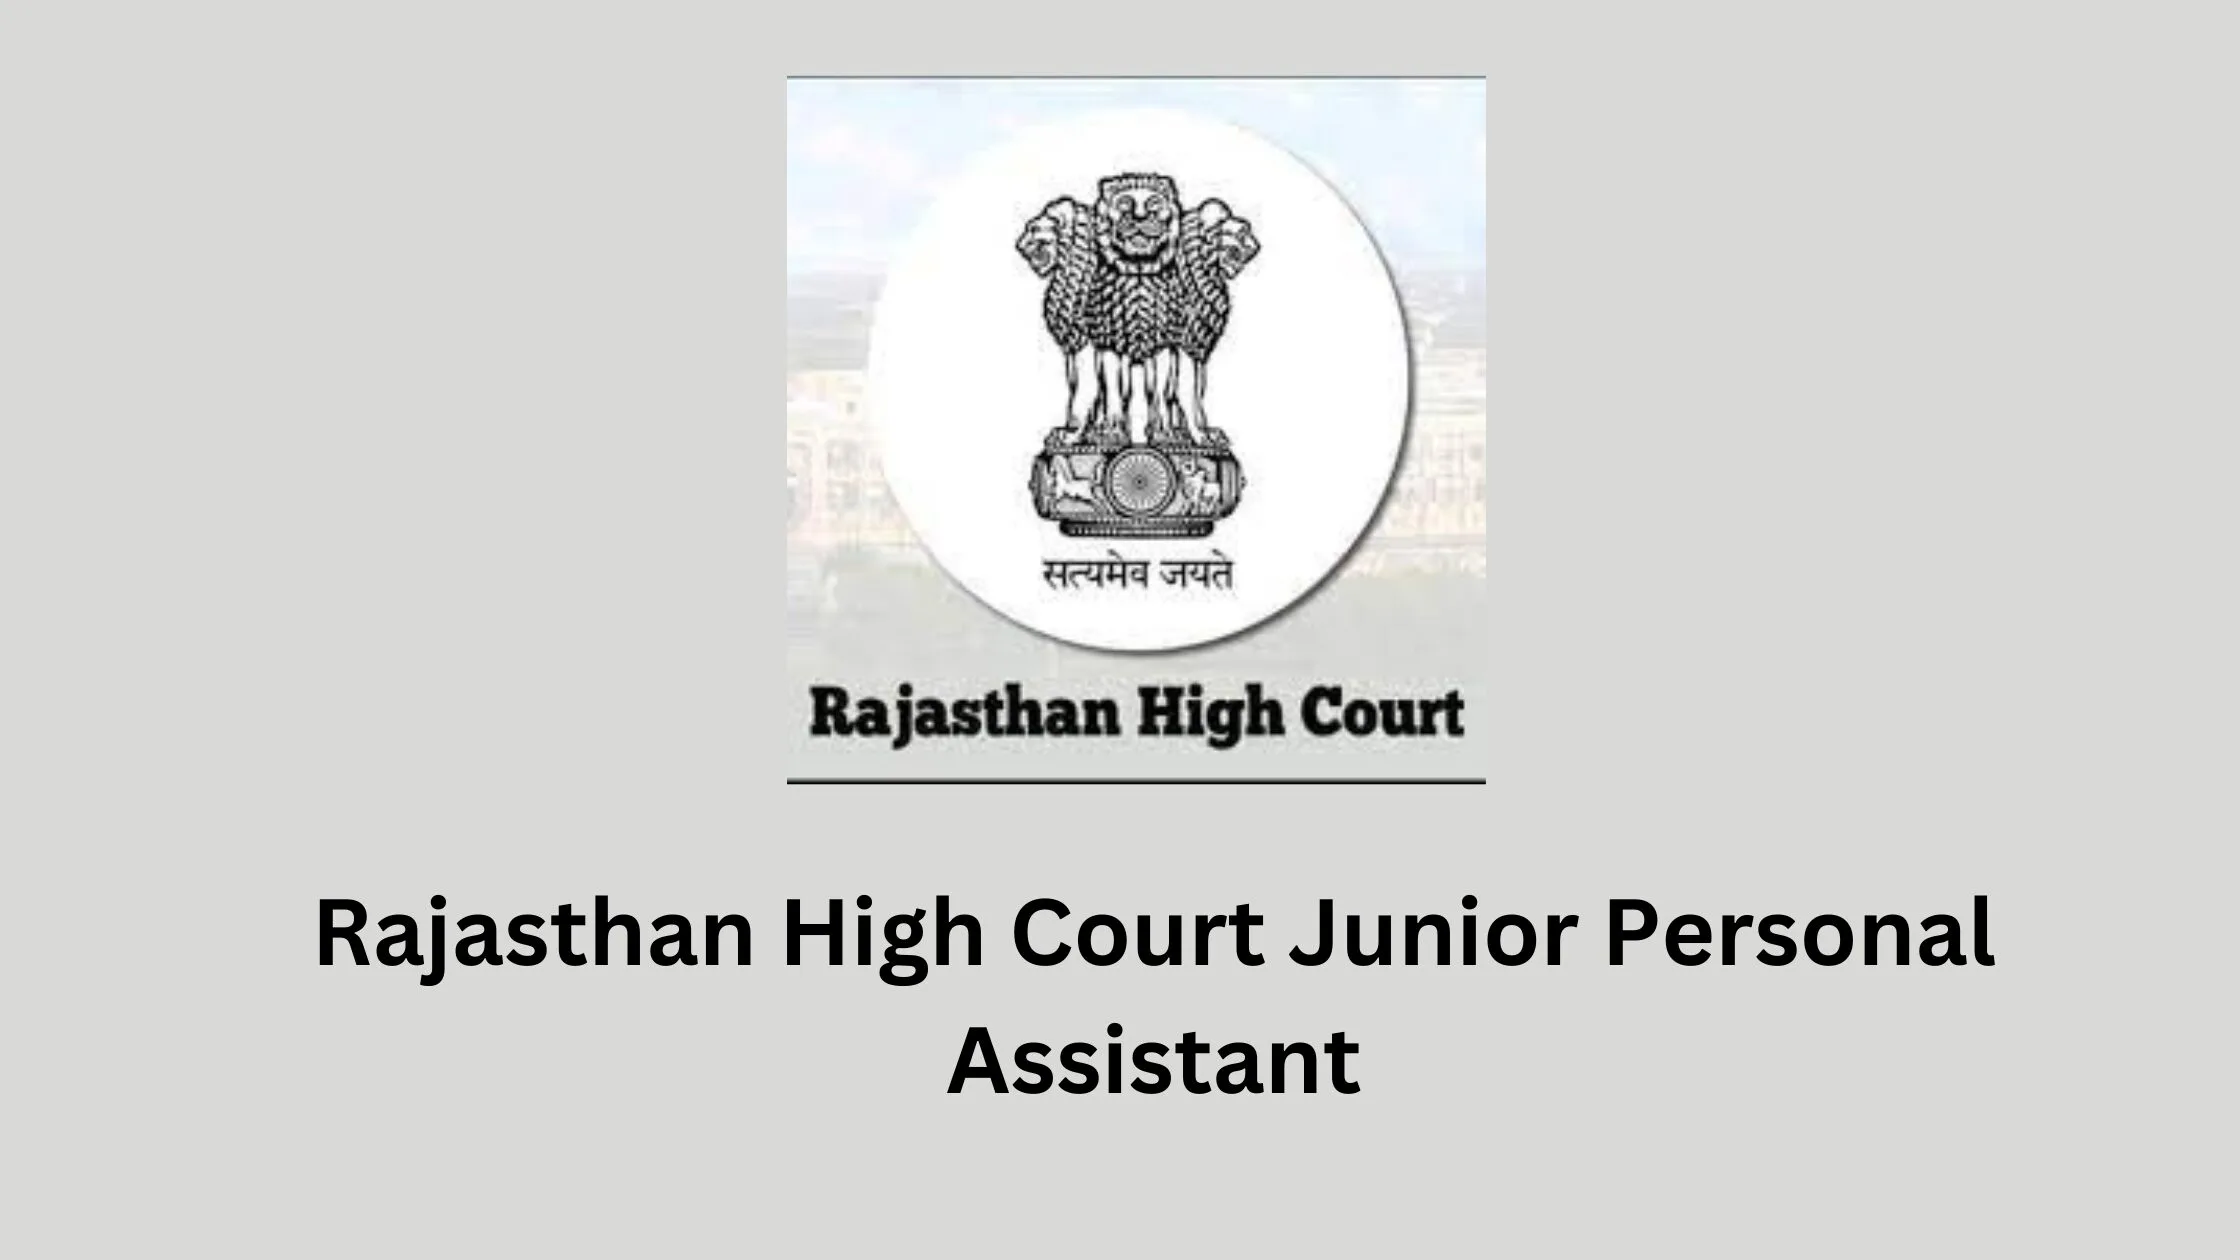 Rajasthan High Court Junior Personal Assistant